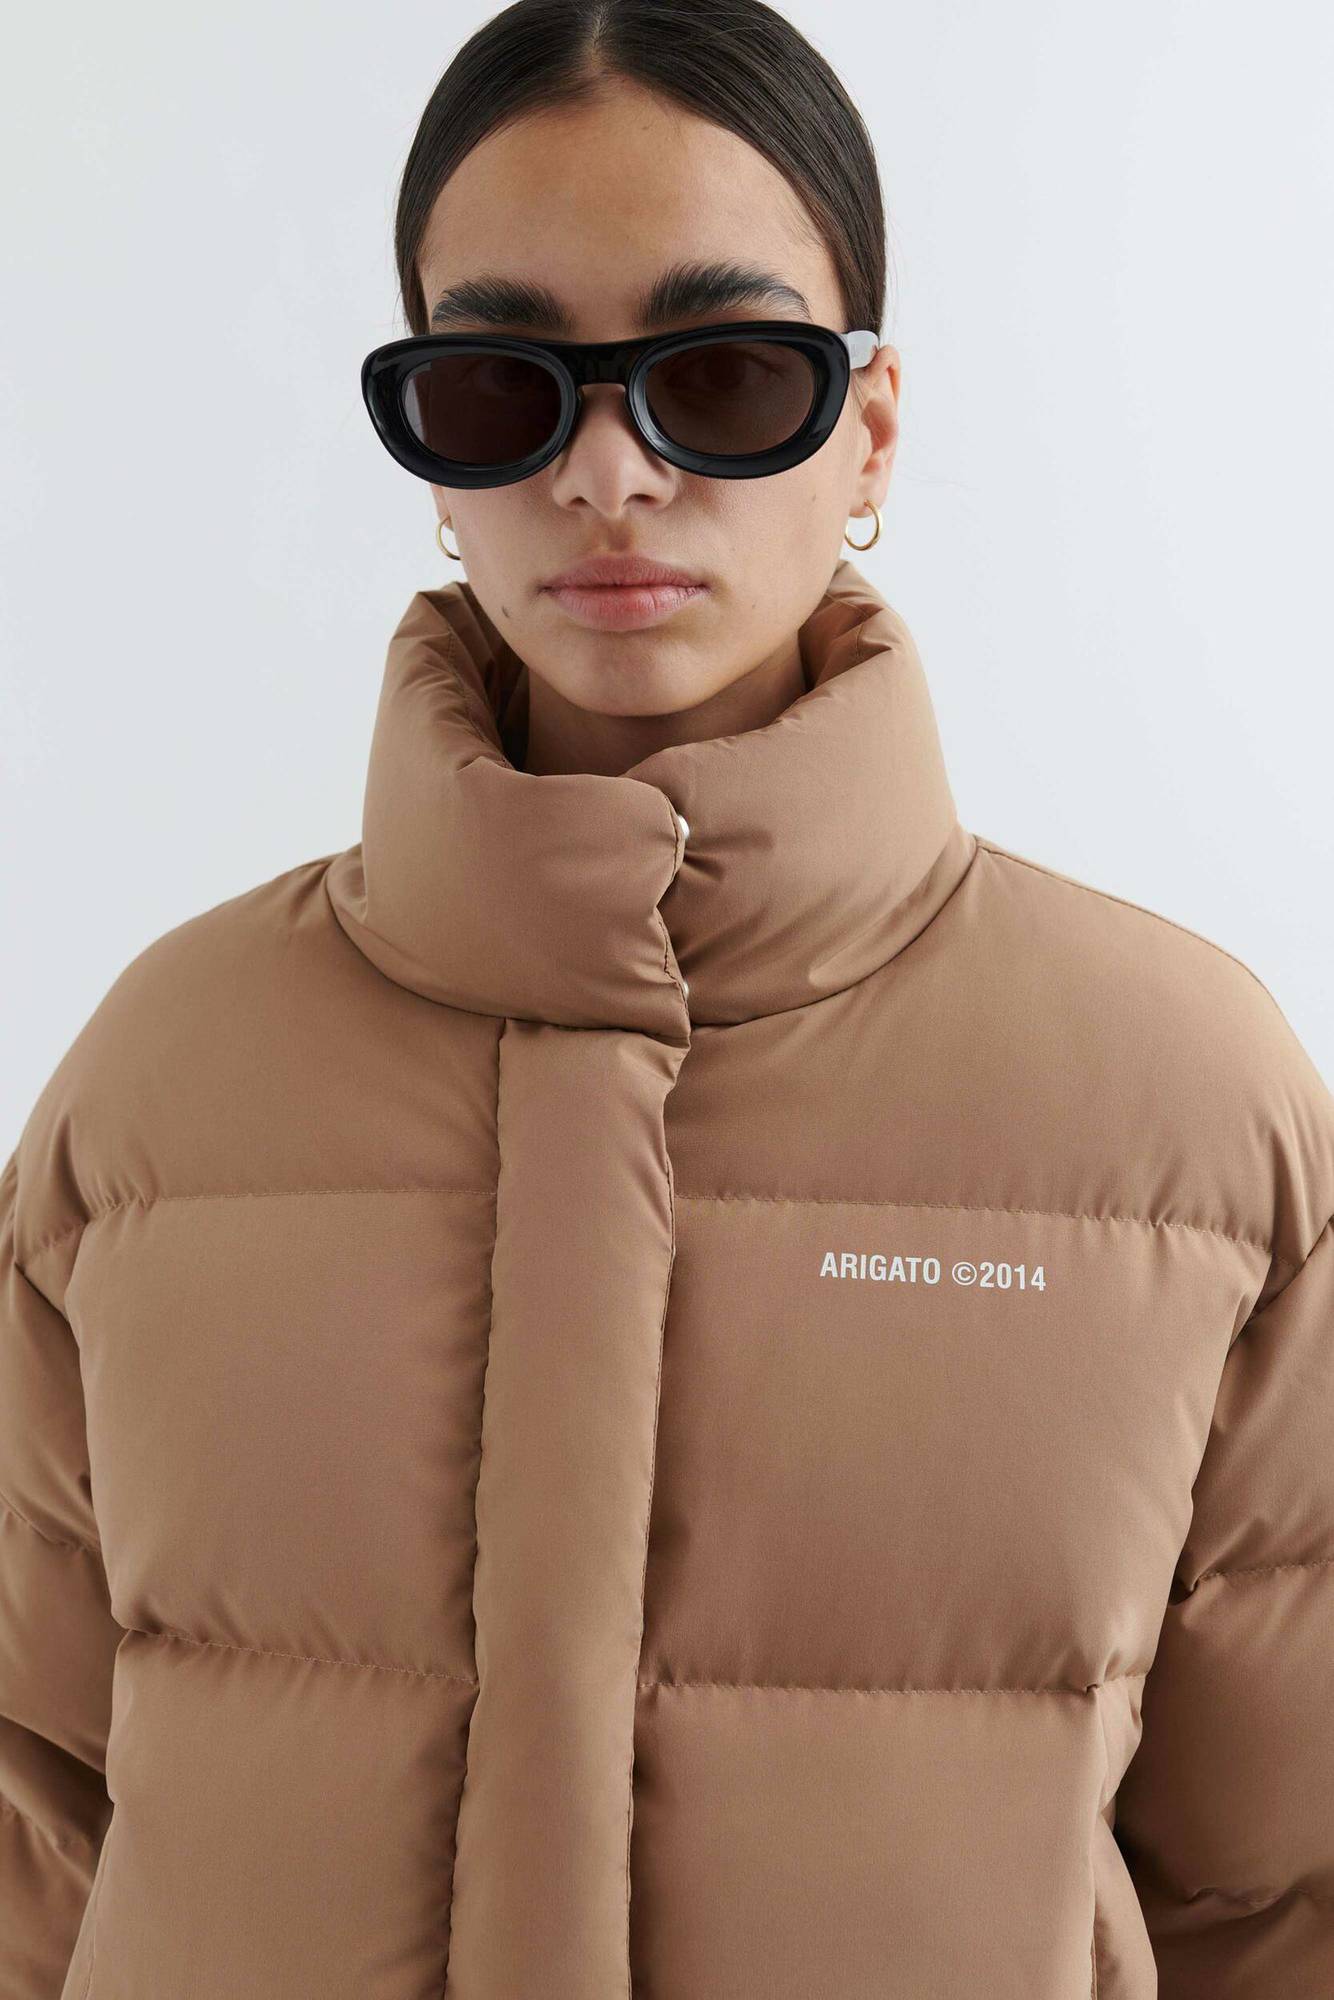 AXEL ARIGATO Halo Down Jacket in Camel XS